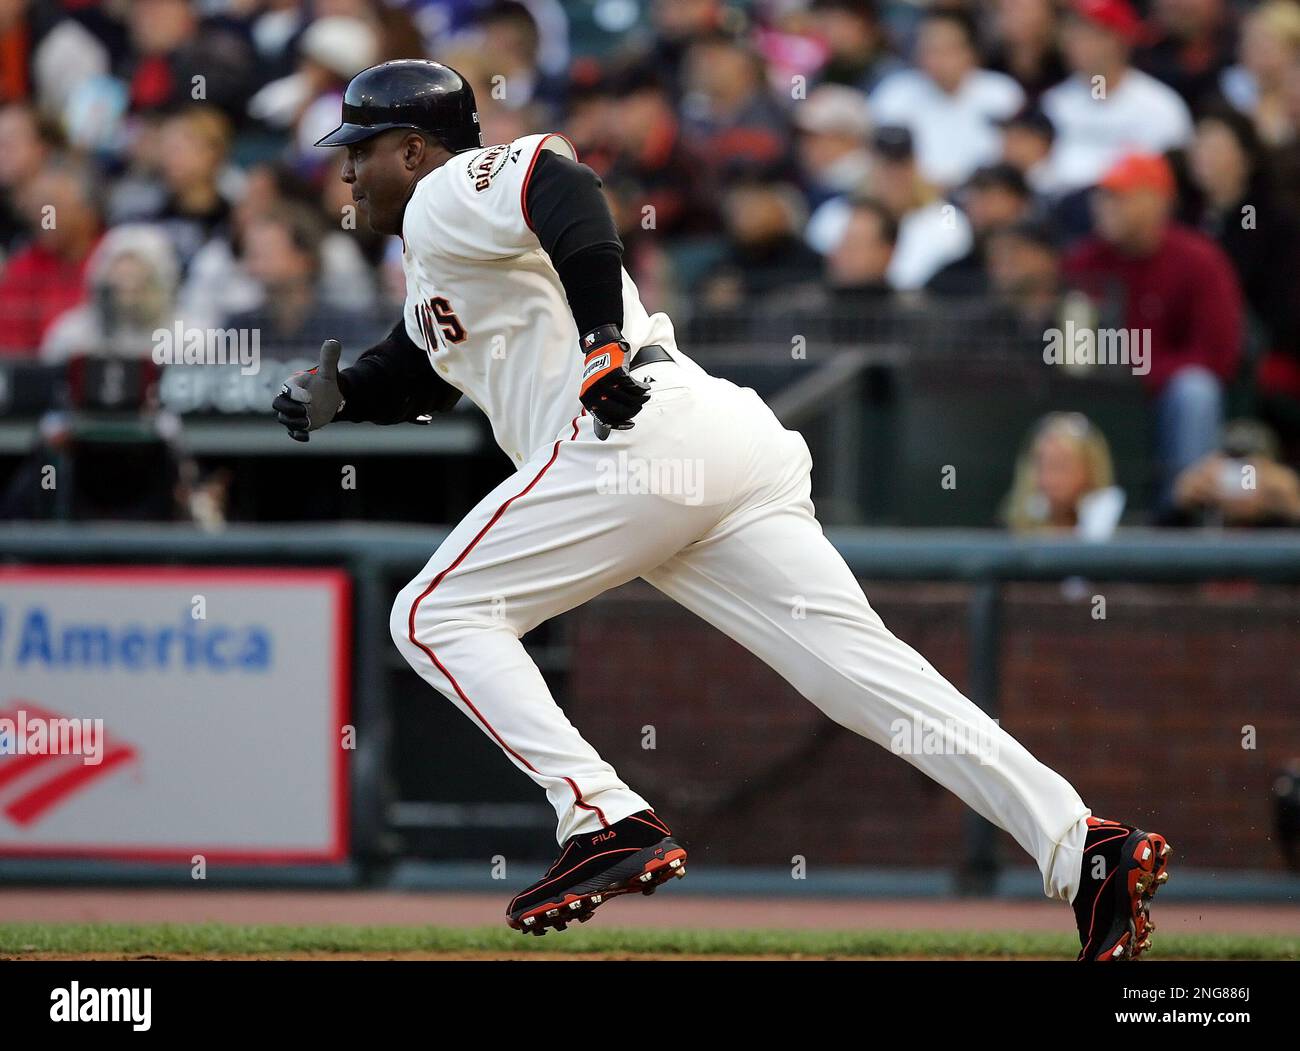 San Francisco Giants' Barry Bonds runs to first base as he grounds